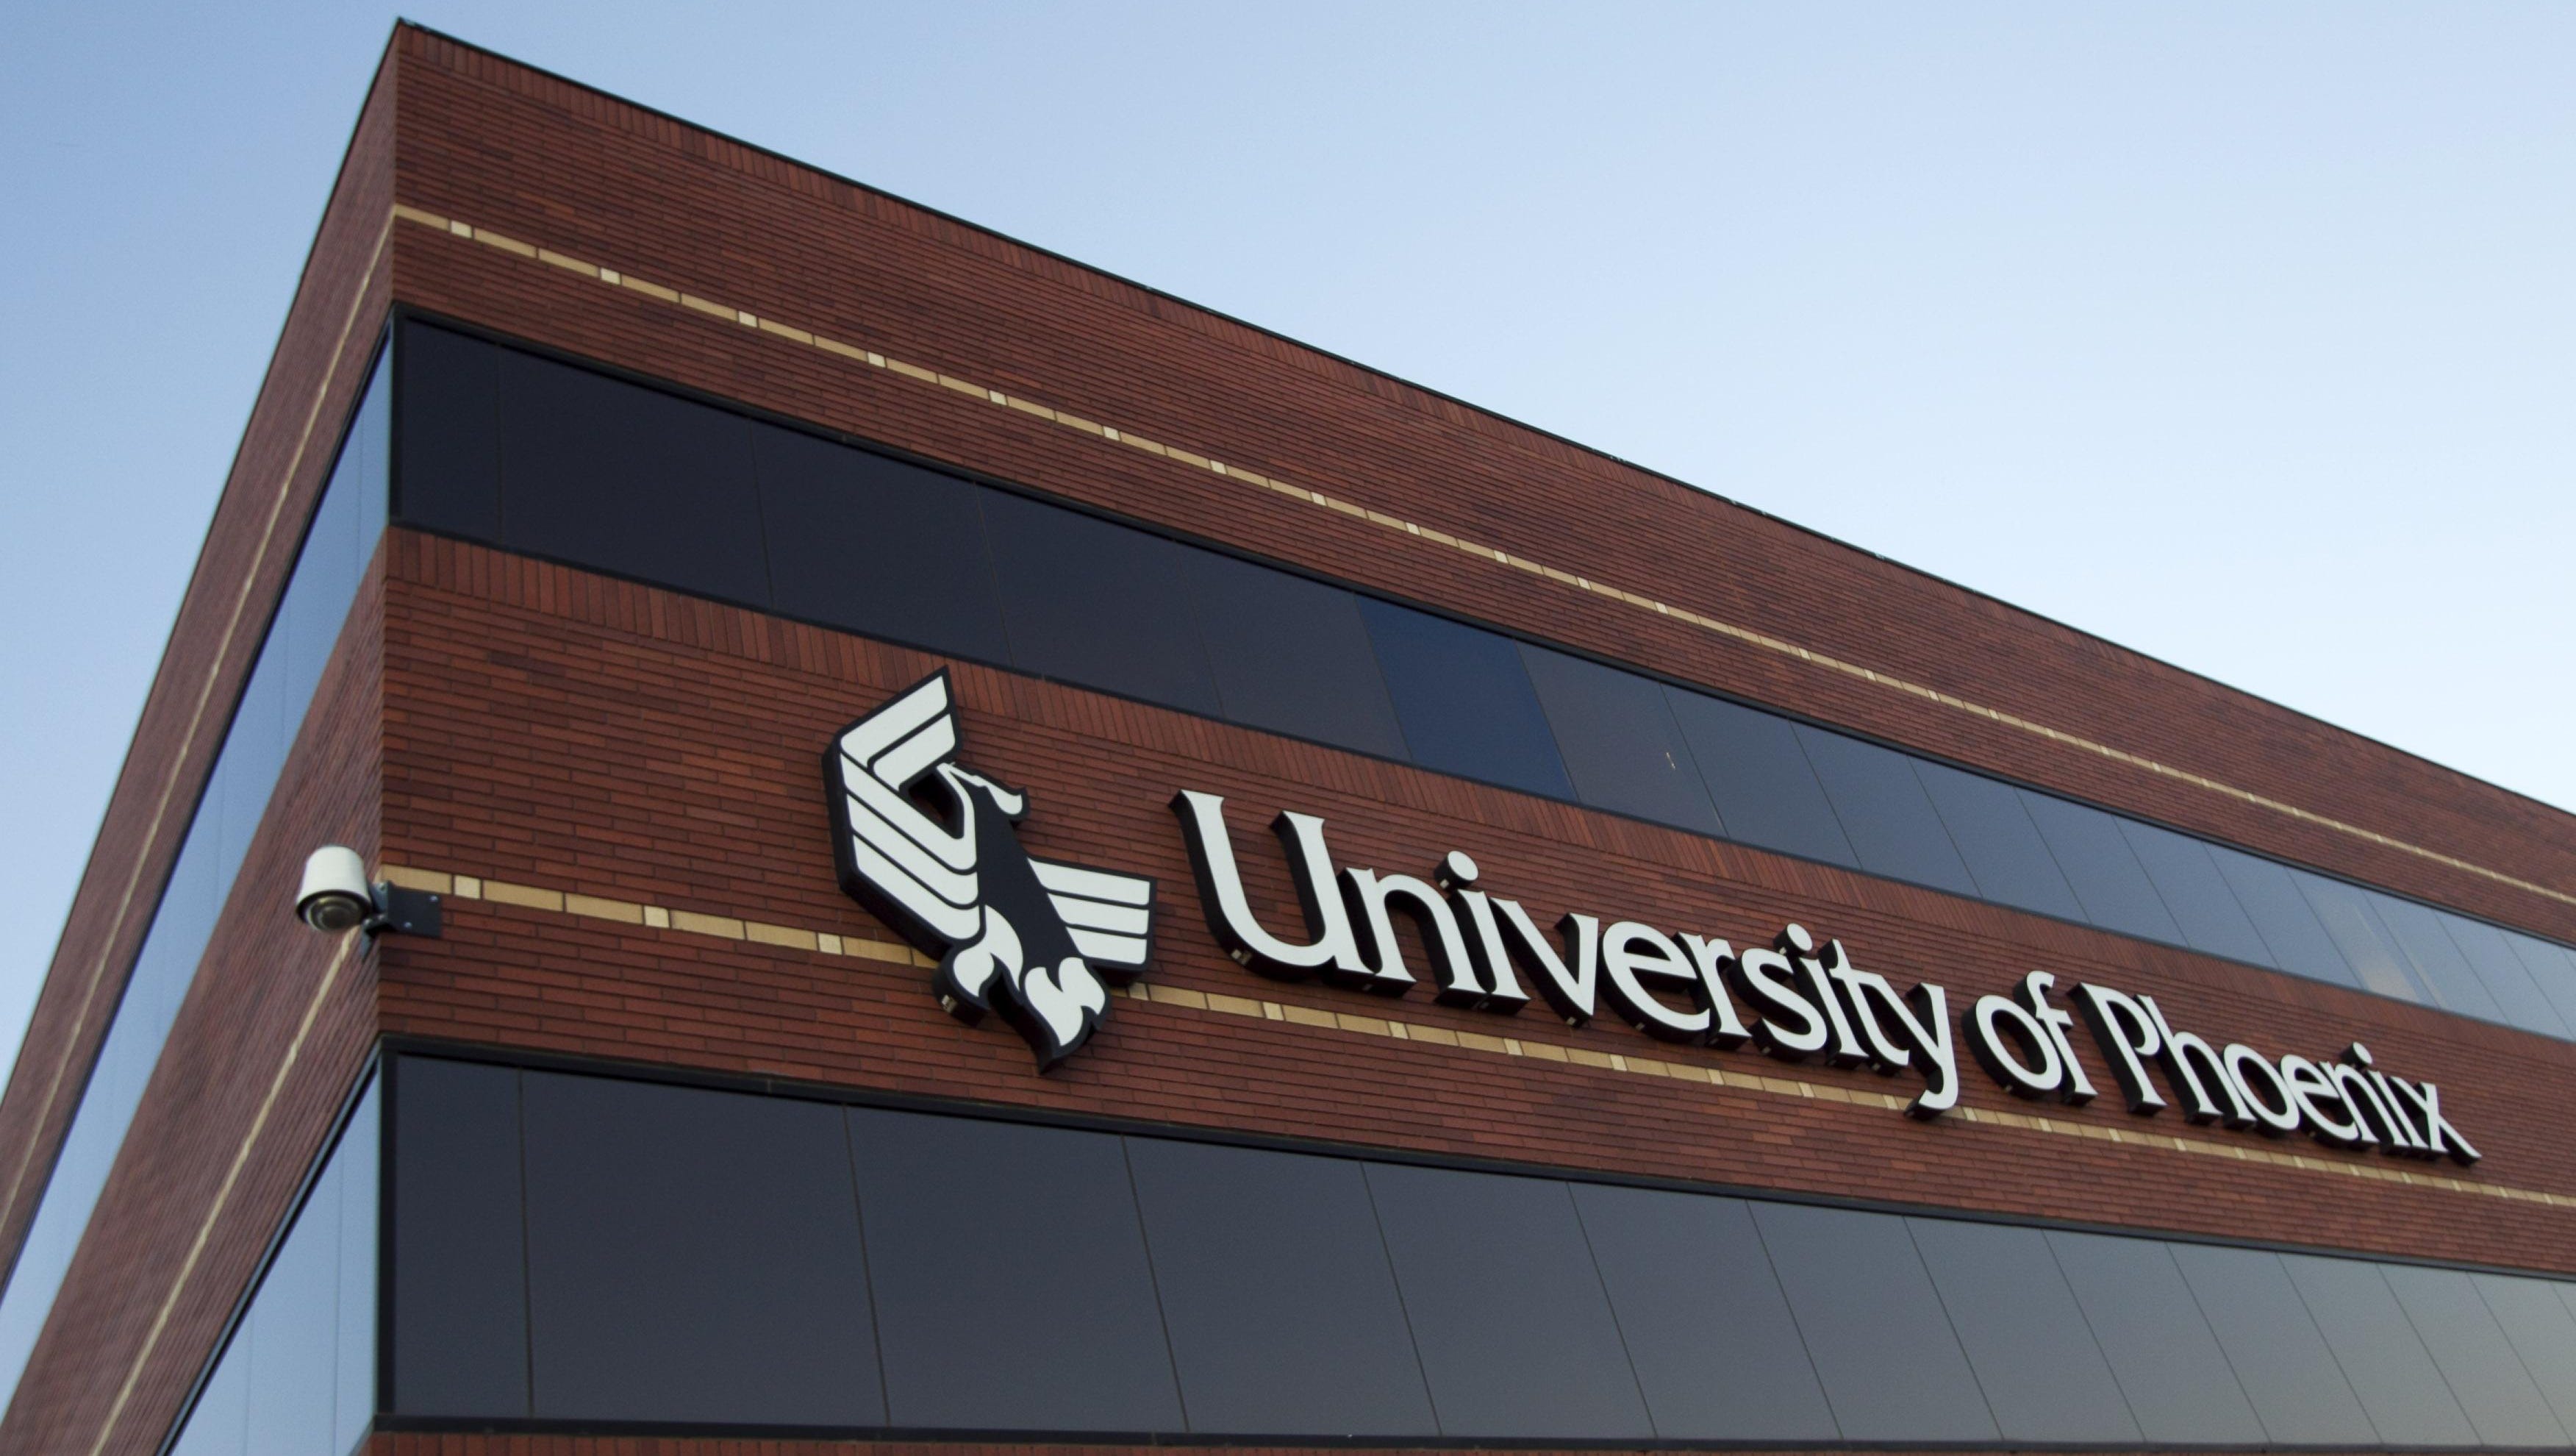 Accrediting agency lifts sanction against University of Phoenix